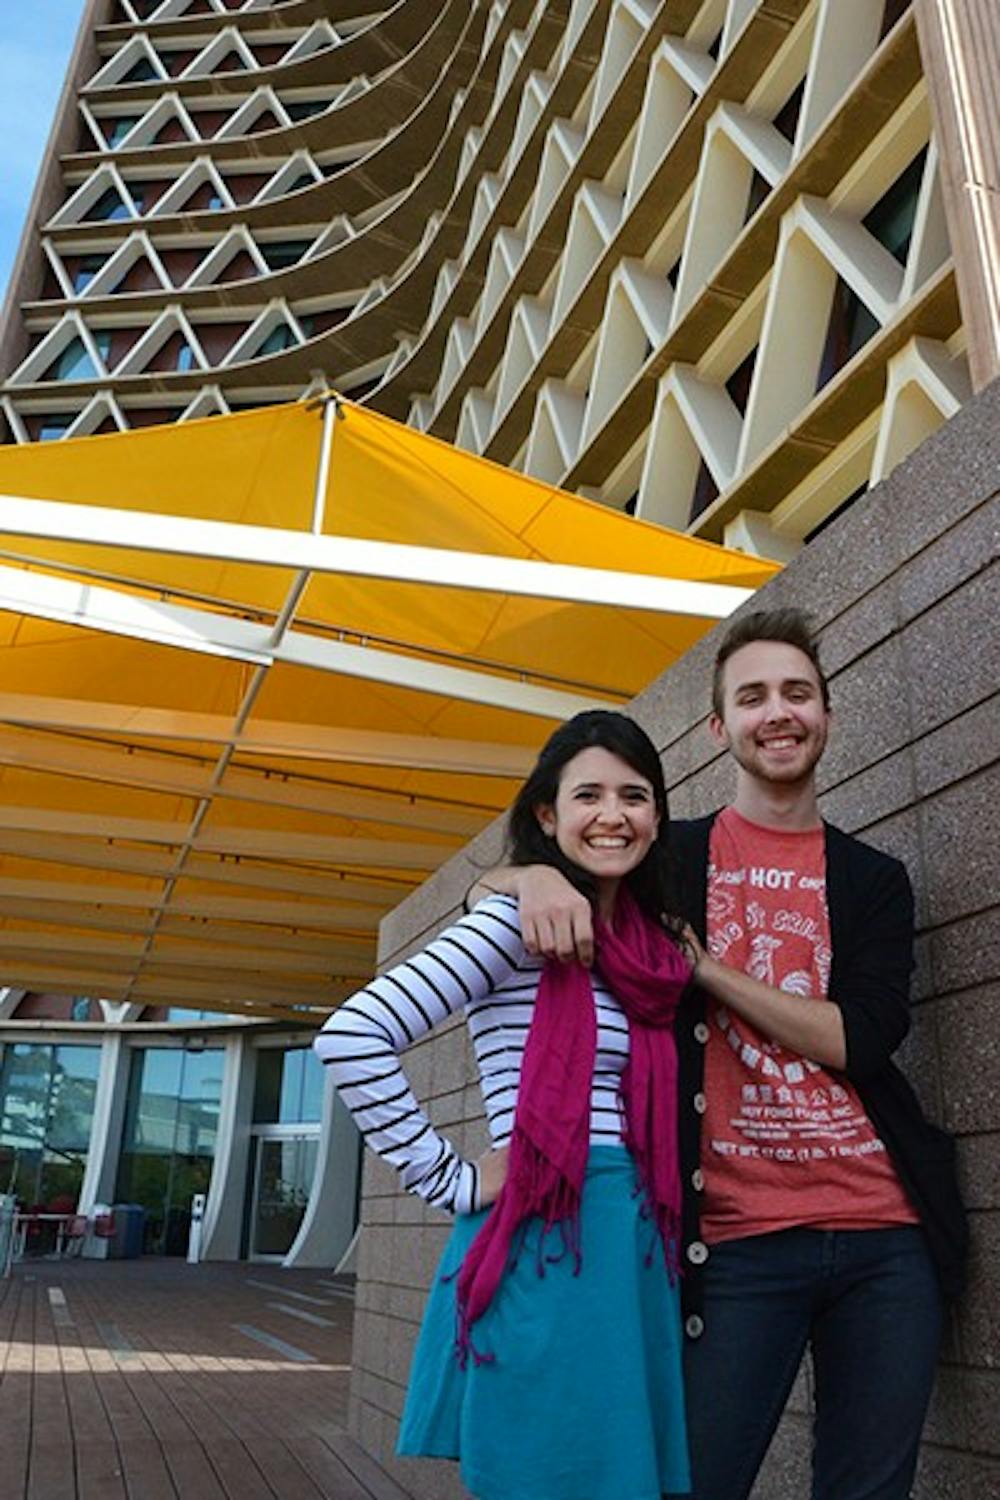 Co-chair Lauren Zack, senior psychology and English double majors, co-founded the Gender Inclusive Housing Action Committee at ASU with Christian Sandoval (not pictured). Zack poses with political science freshman Brandon Marks, a supportive member of the GIHAC, in front of Manzanita Hall on ASU's Tempe campus. (Photo by Rachel Nemeh)